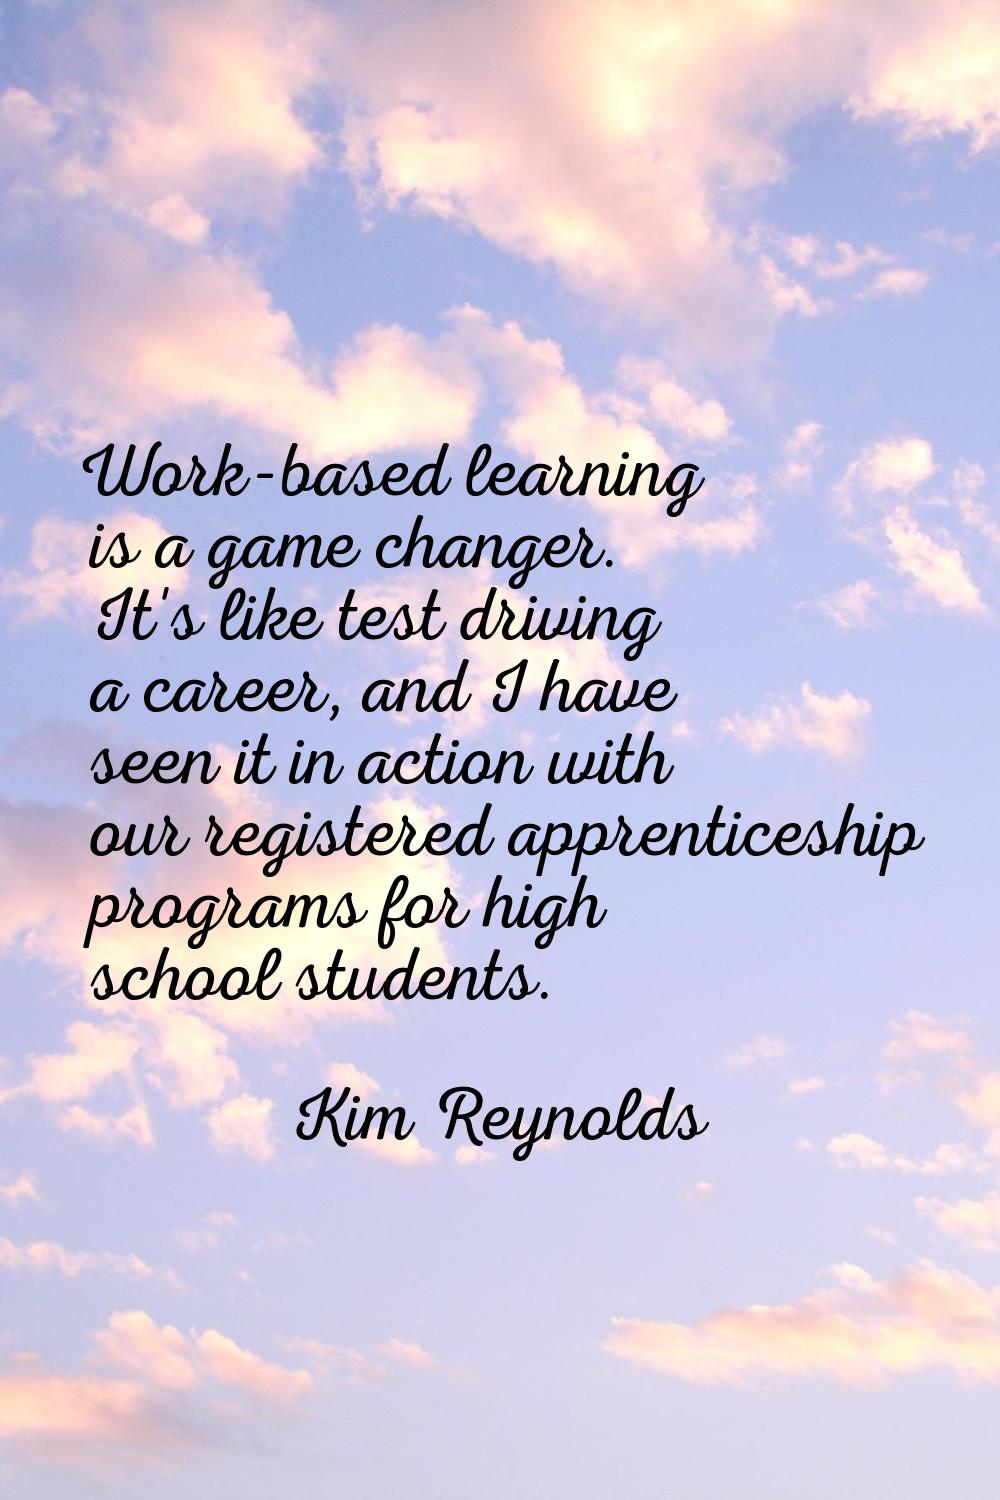 Work-based learning is a game changer. It's like test driving a career, and I have seen it in actio